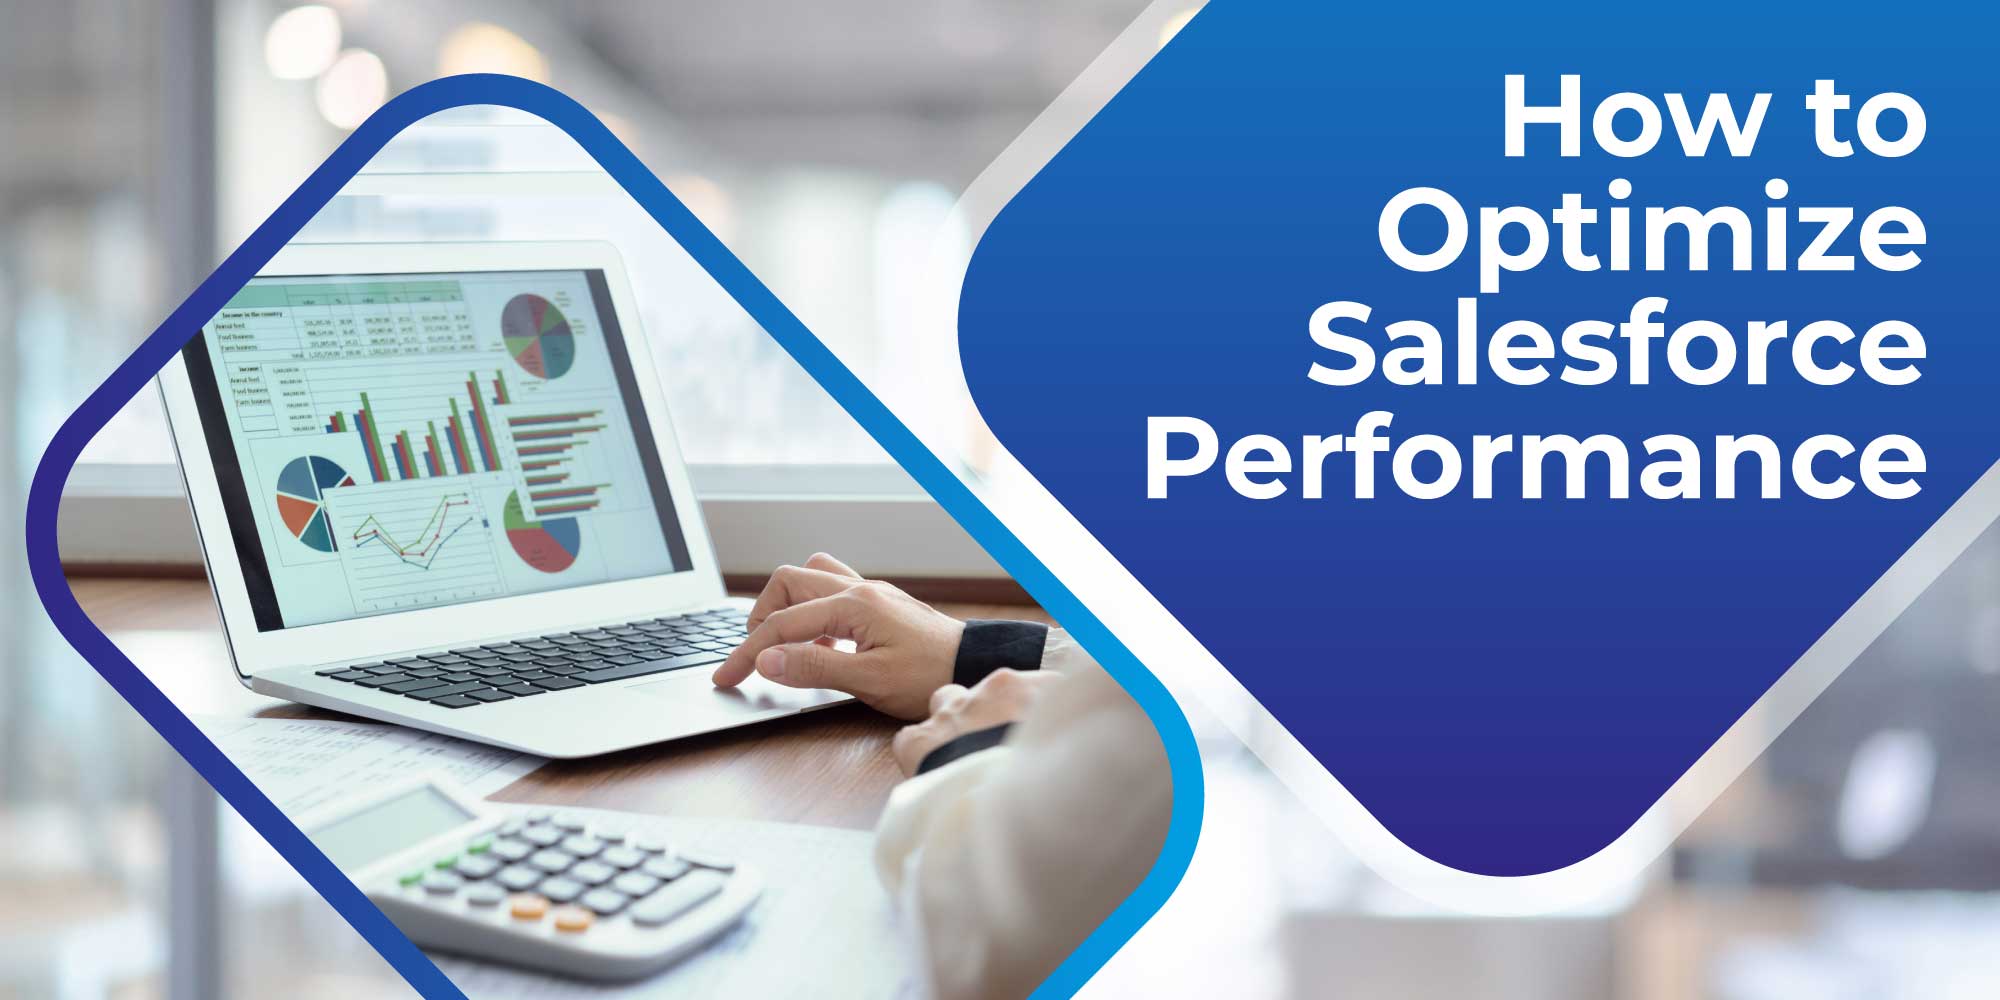 How to Optimize Salesforce Performance